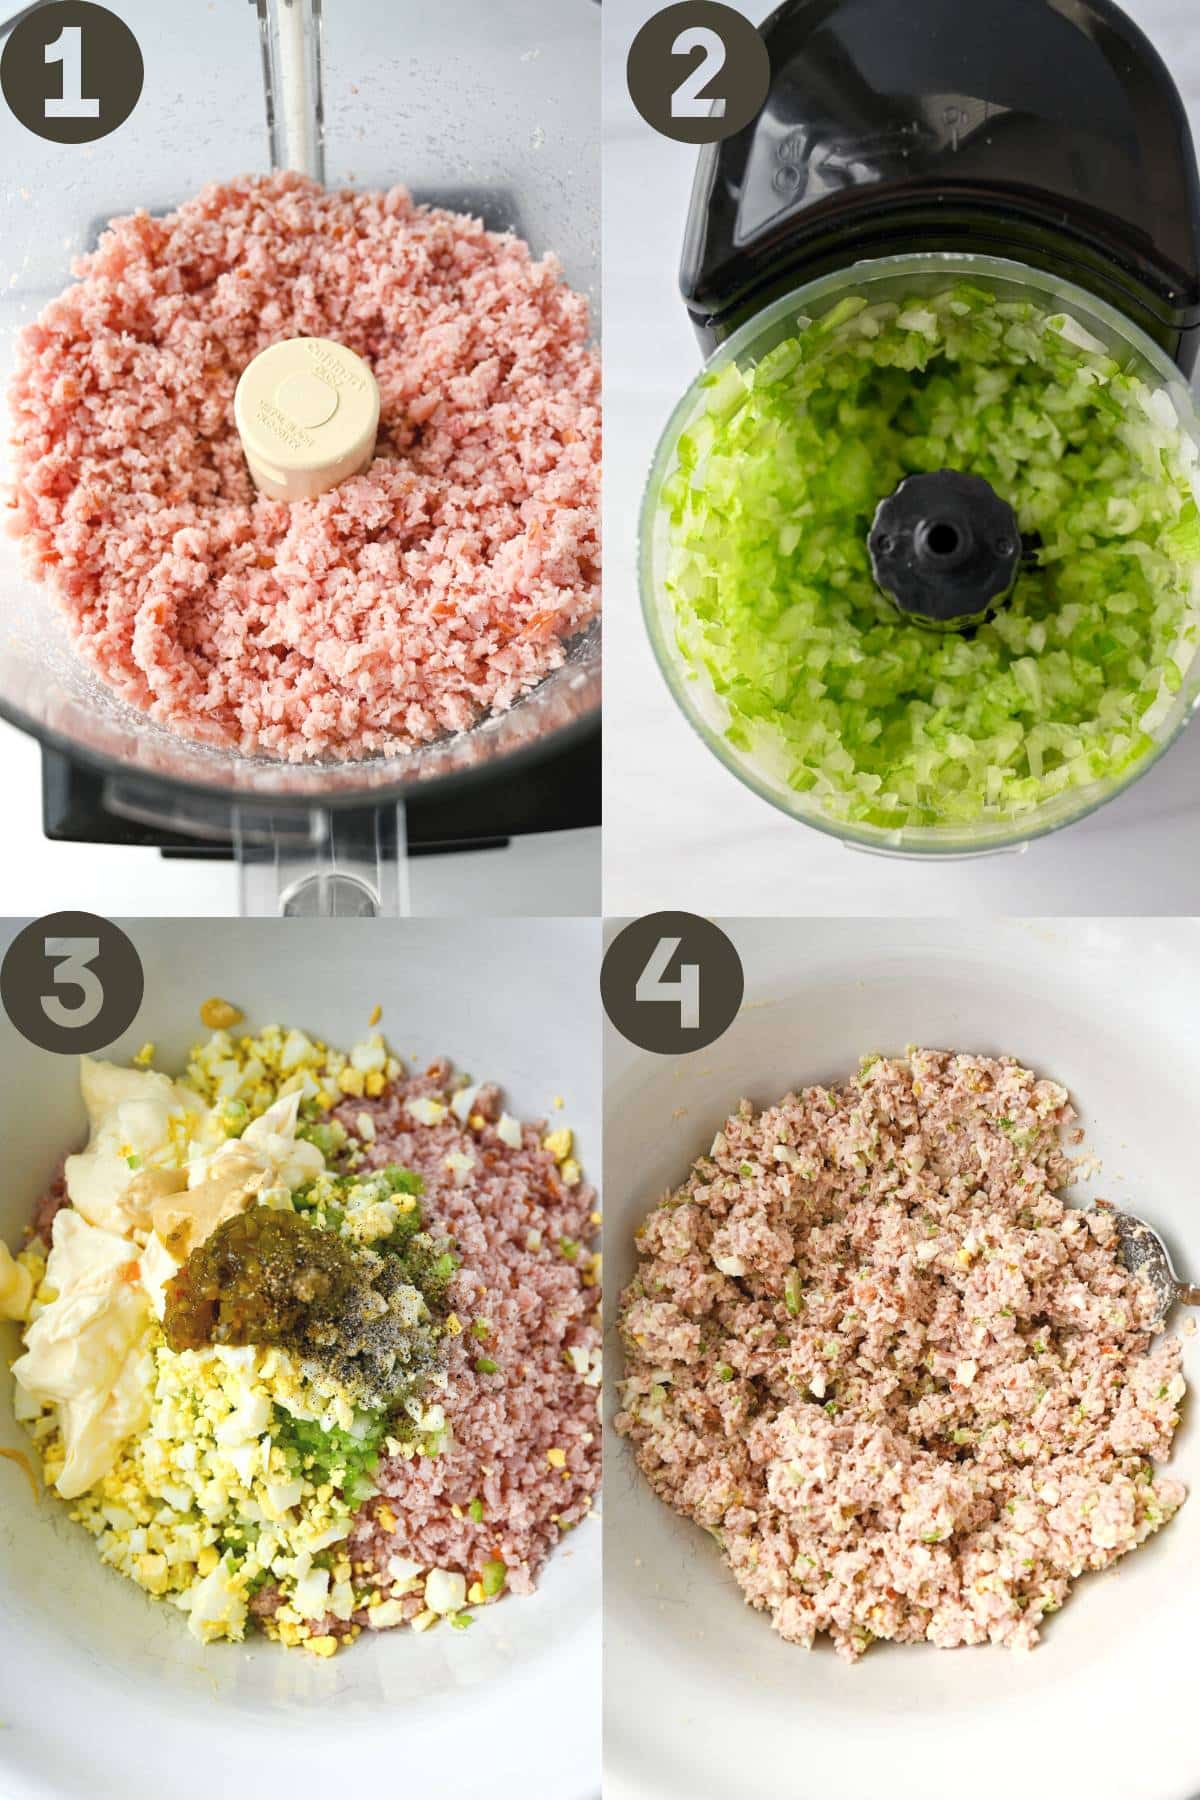 steps to make ham salad-in the food processor, mixed in a bowl